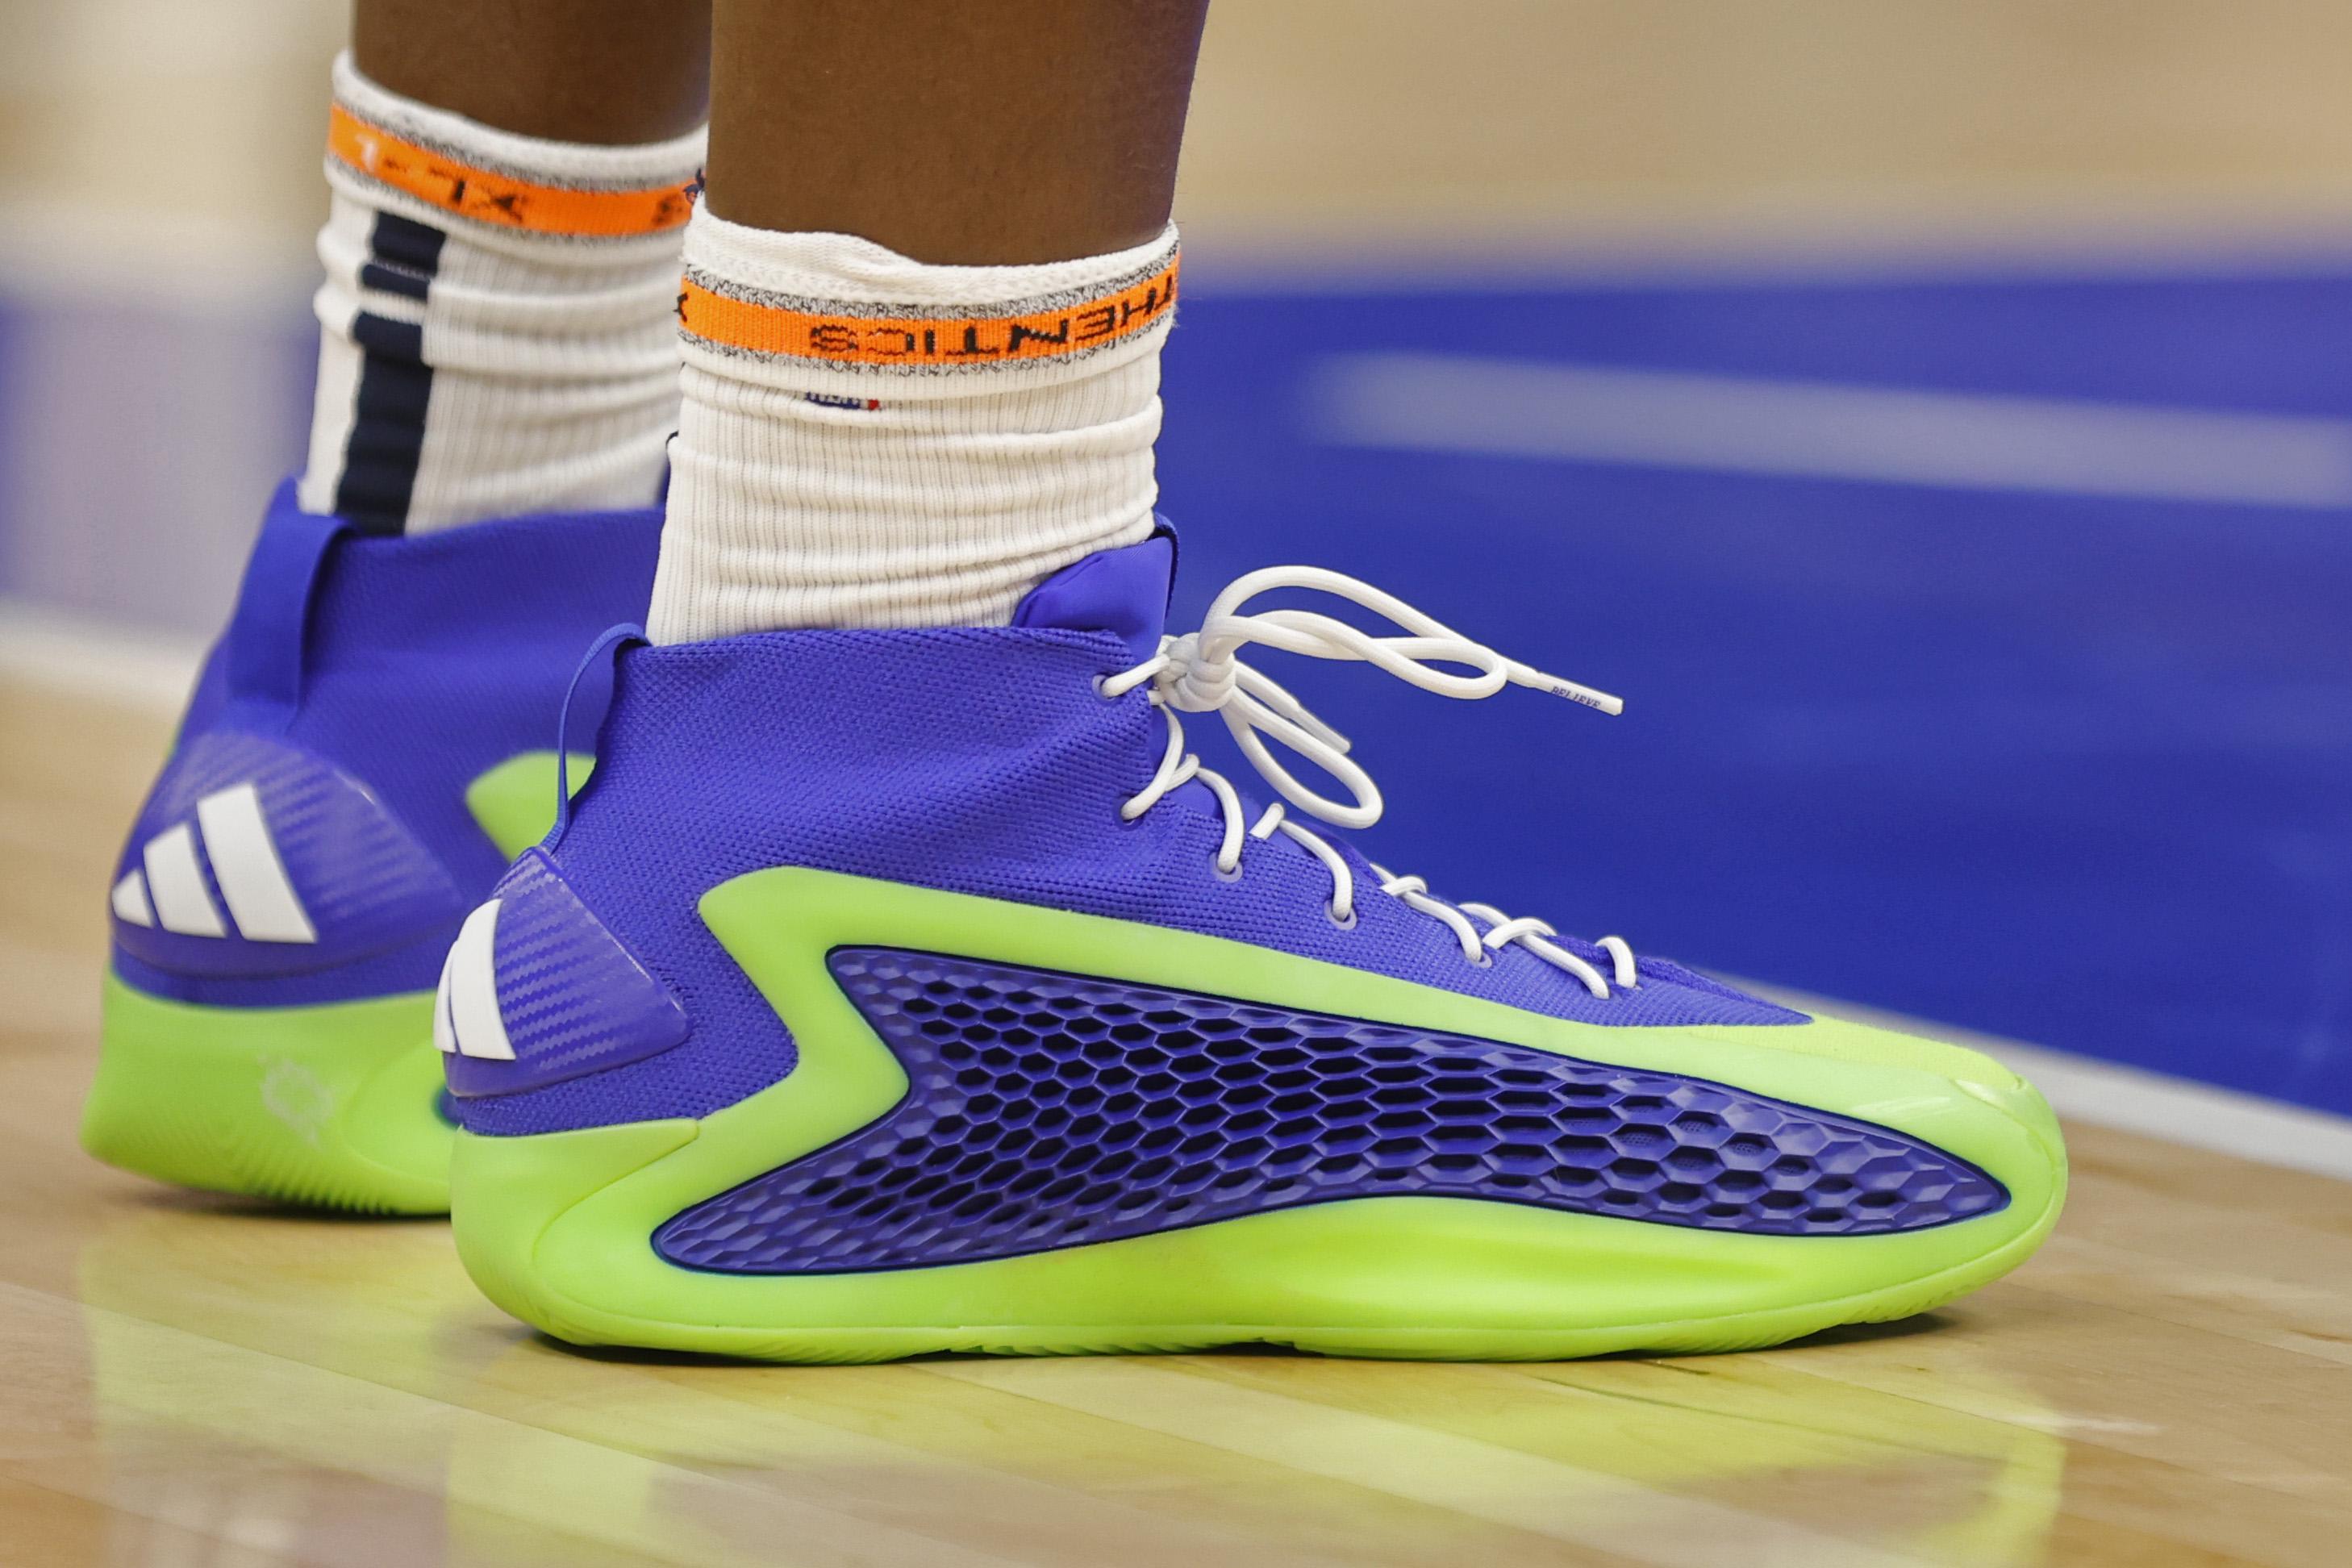 Minnesota Timberwolves guard Anthony Edwards' blue and green adidas sneakers.